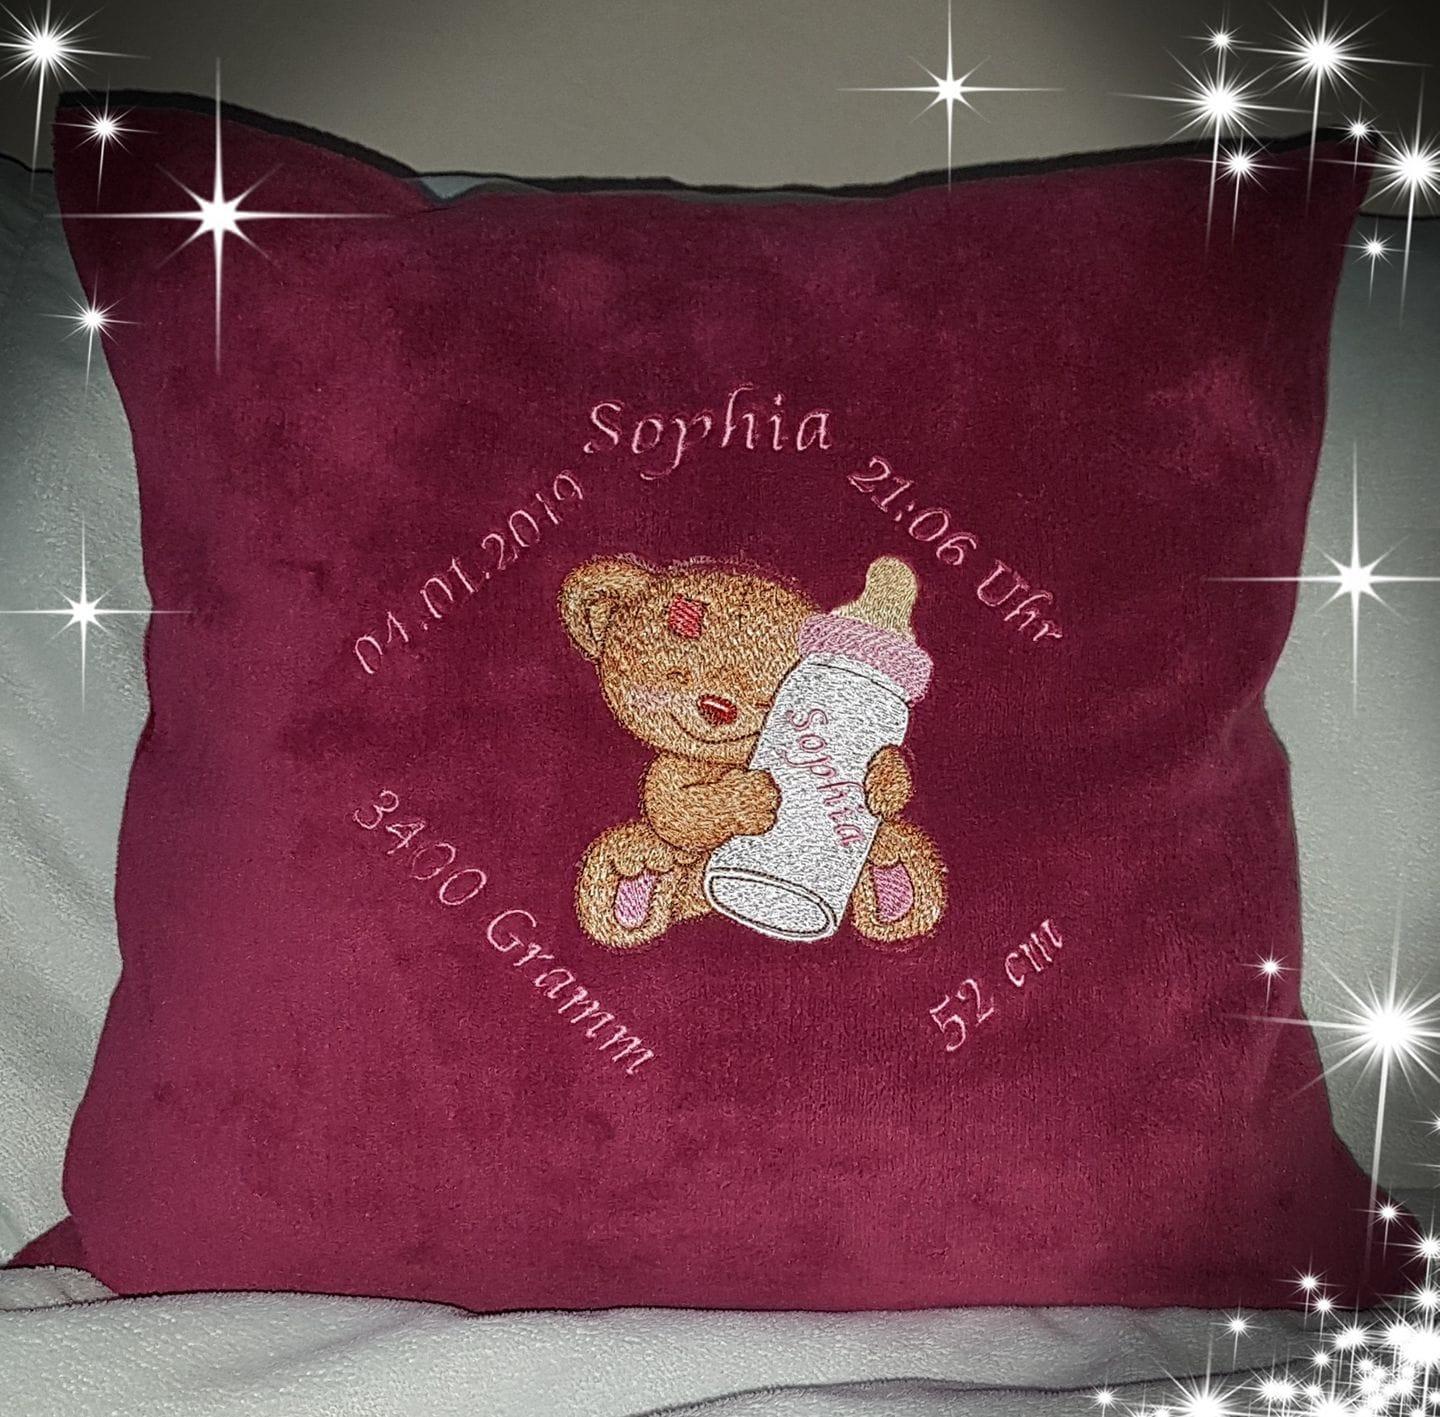 Embroidered cushion with Little bear and bottle design